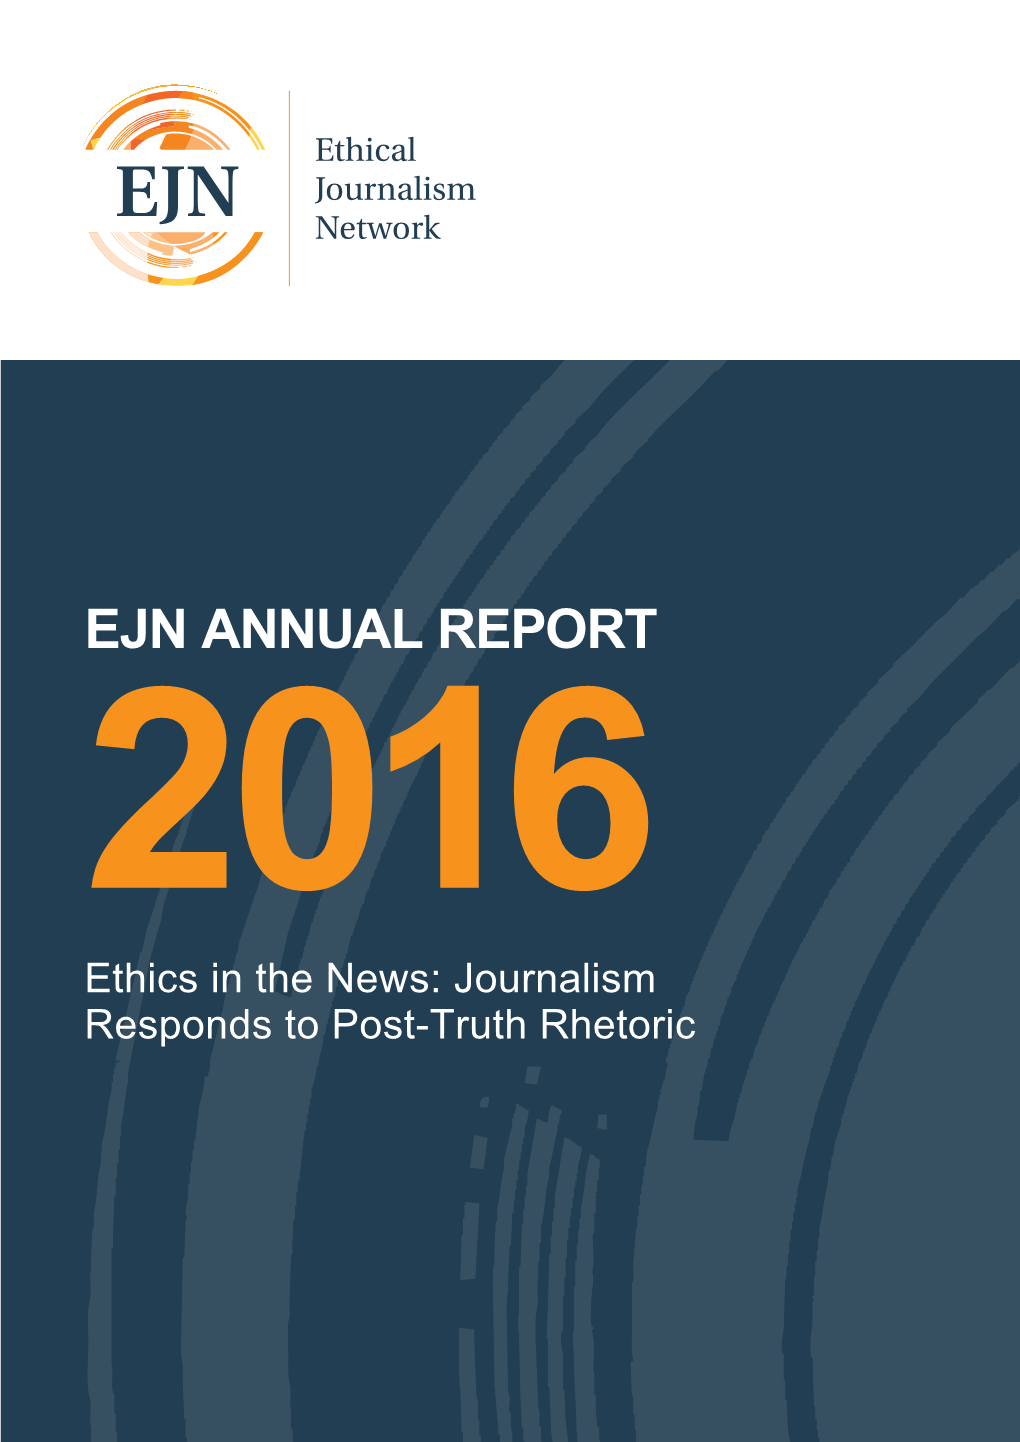 EJN Annual Report 2016 Ethics in the News: Journalism Responds to Post-Truth Rhetoric